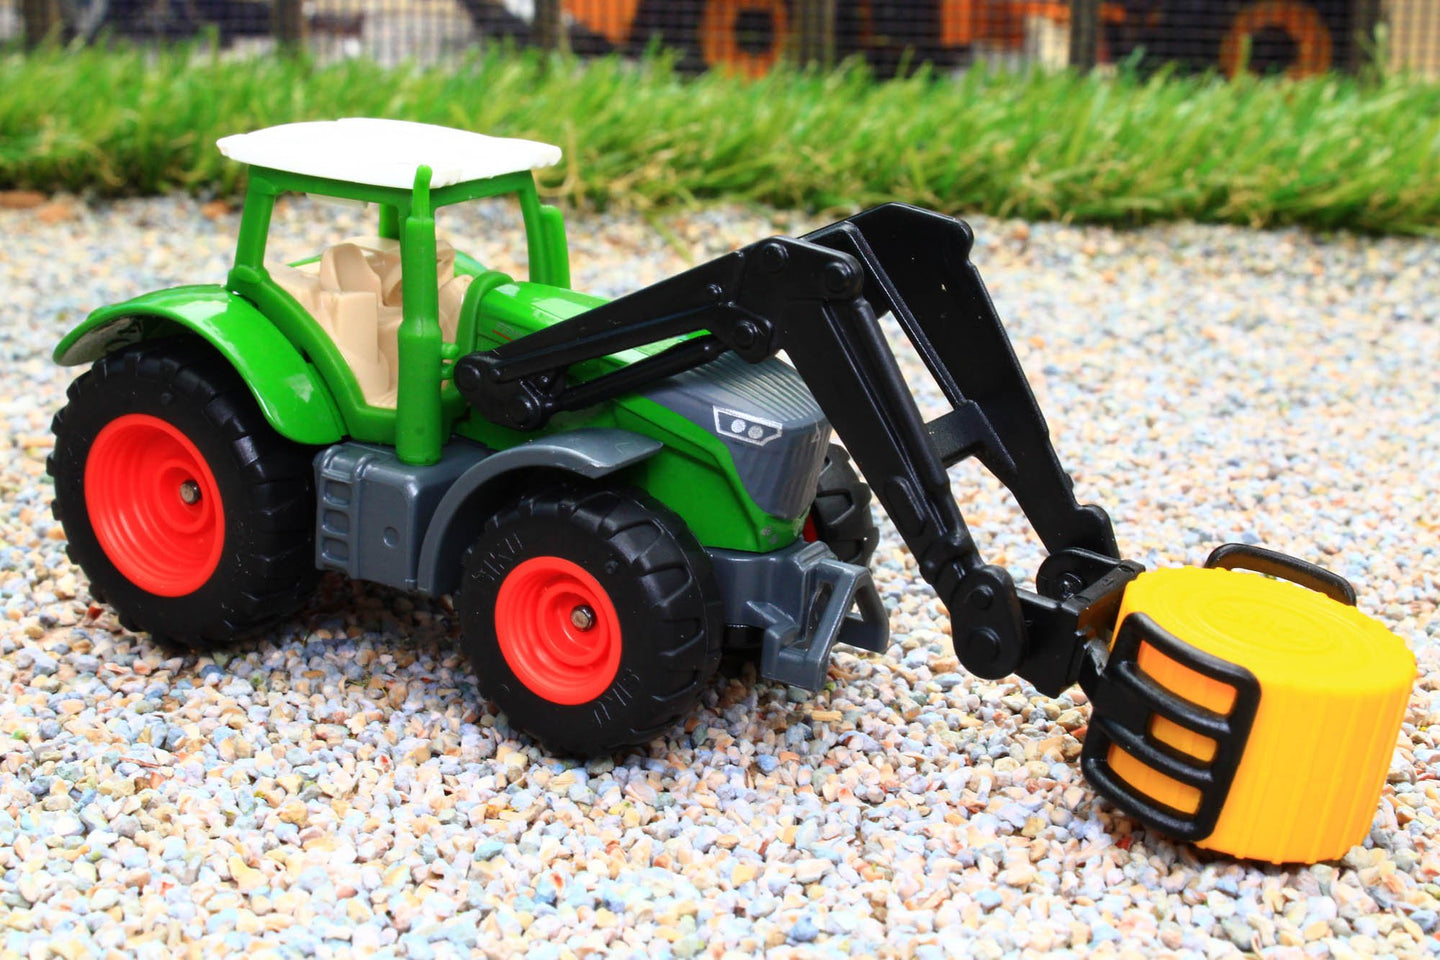 1539 SIKU 187 SCALE FENDT TRACTOR WITH FRONT LOADER AND ROUND BALE GRAB